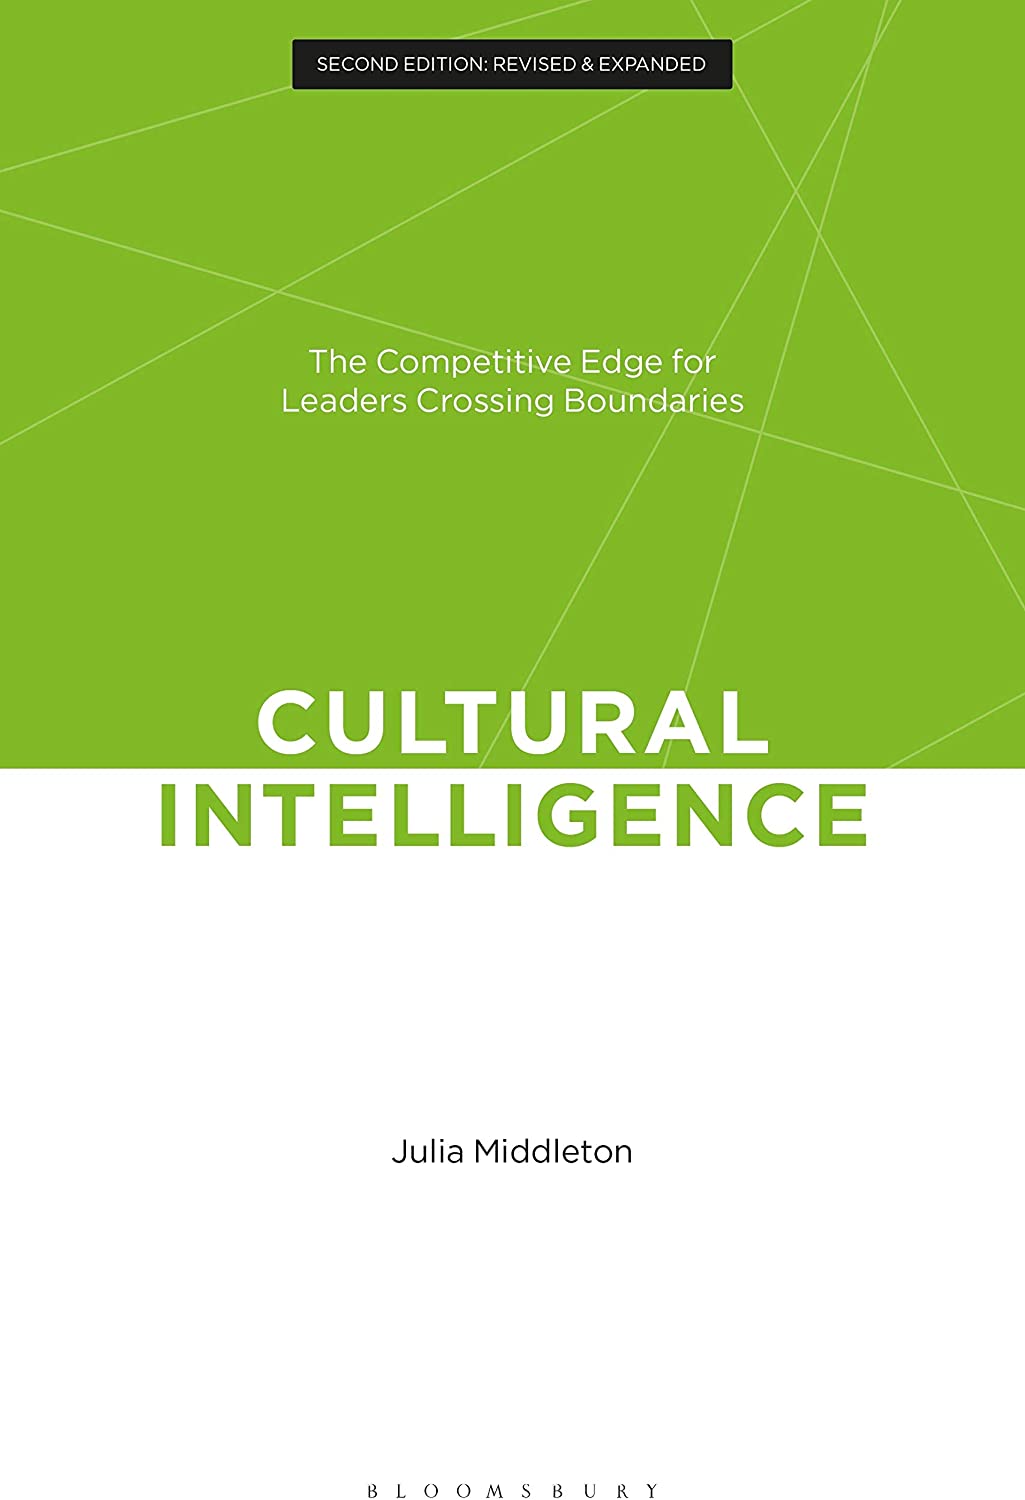 Cultural Intelligence: The Competitive Edge for Leaders Crossing Boundaries